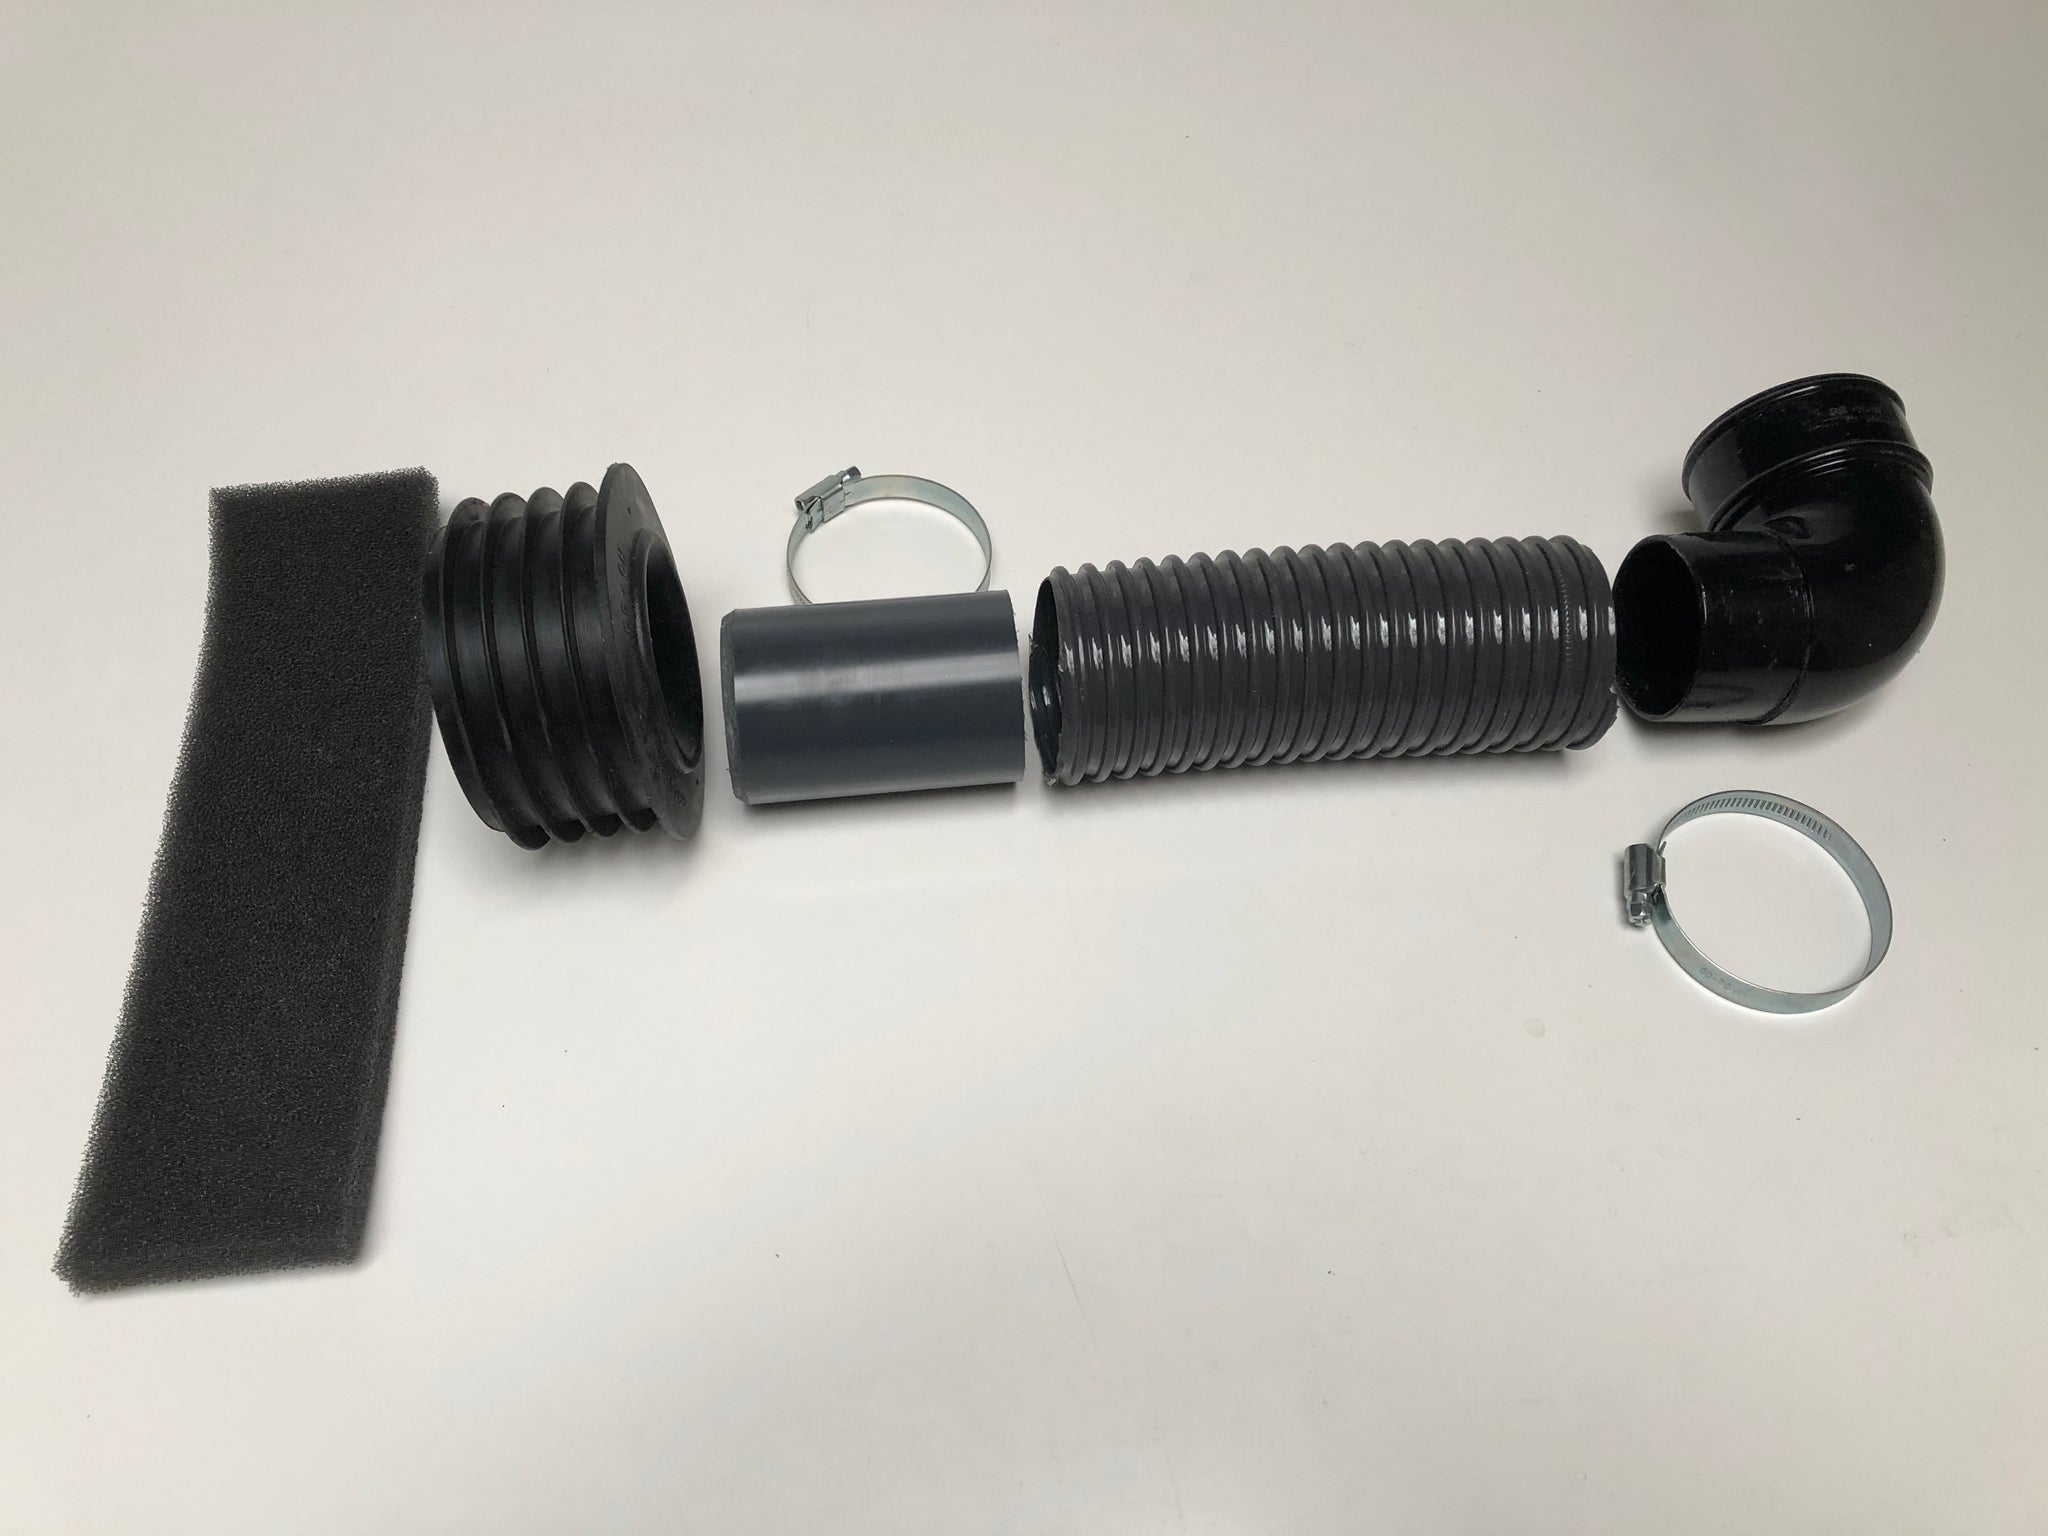 Flexible ducting kit for carbon filter